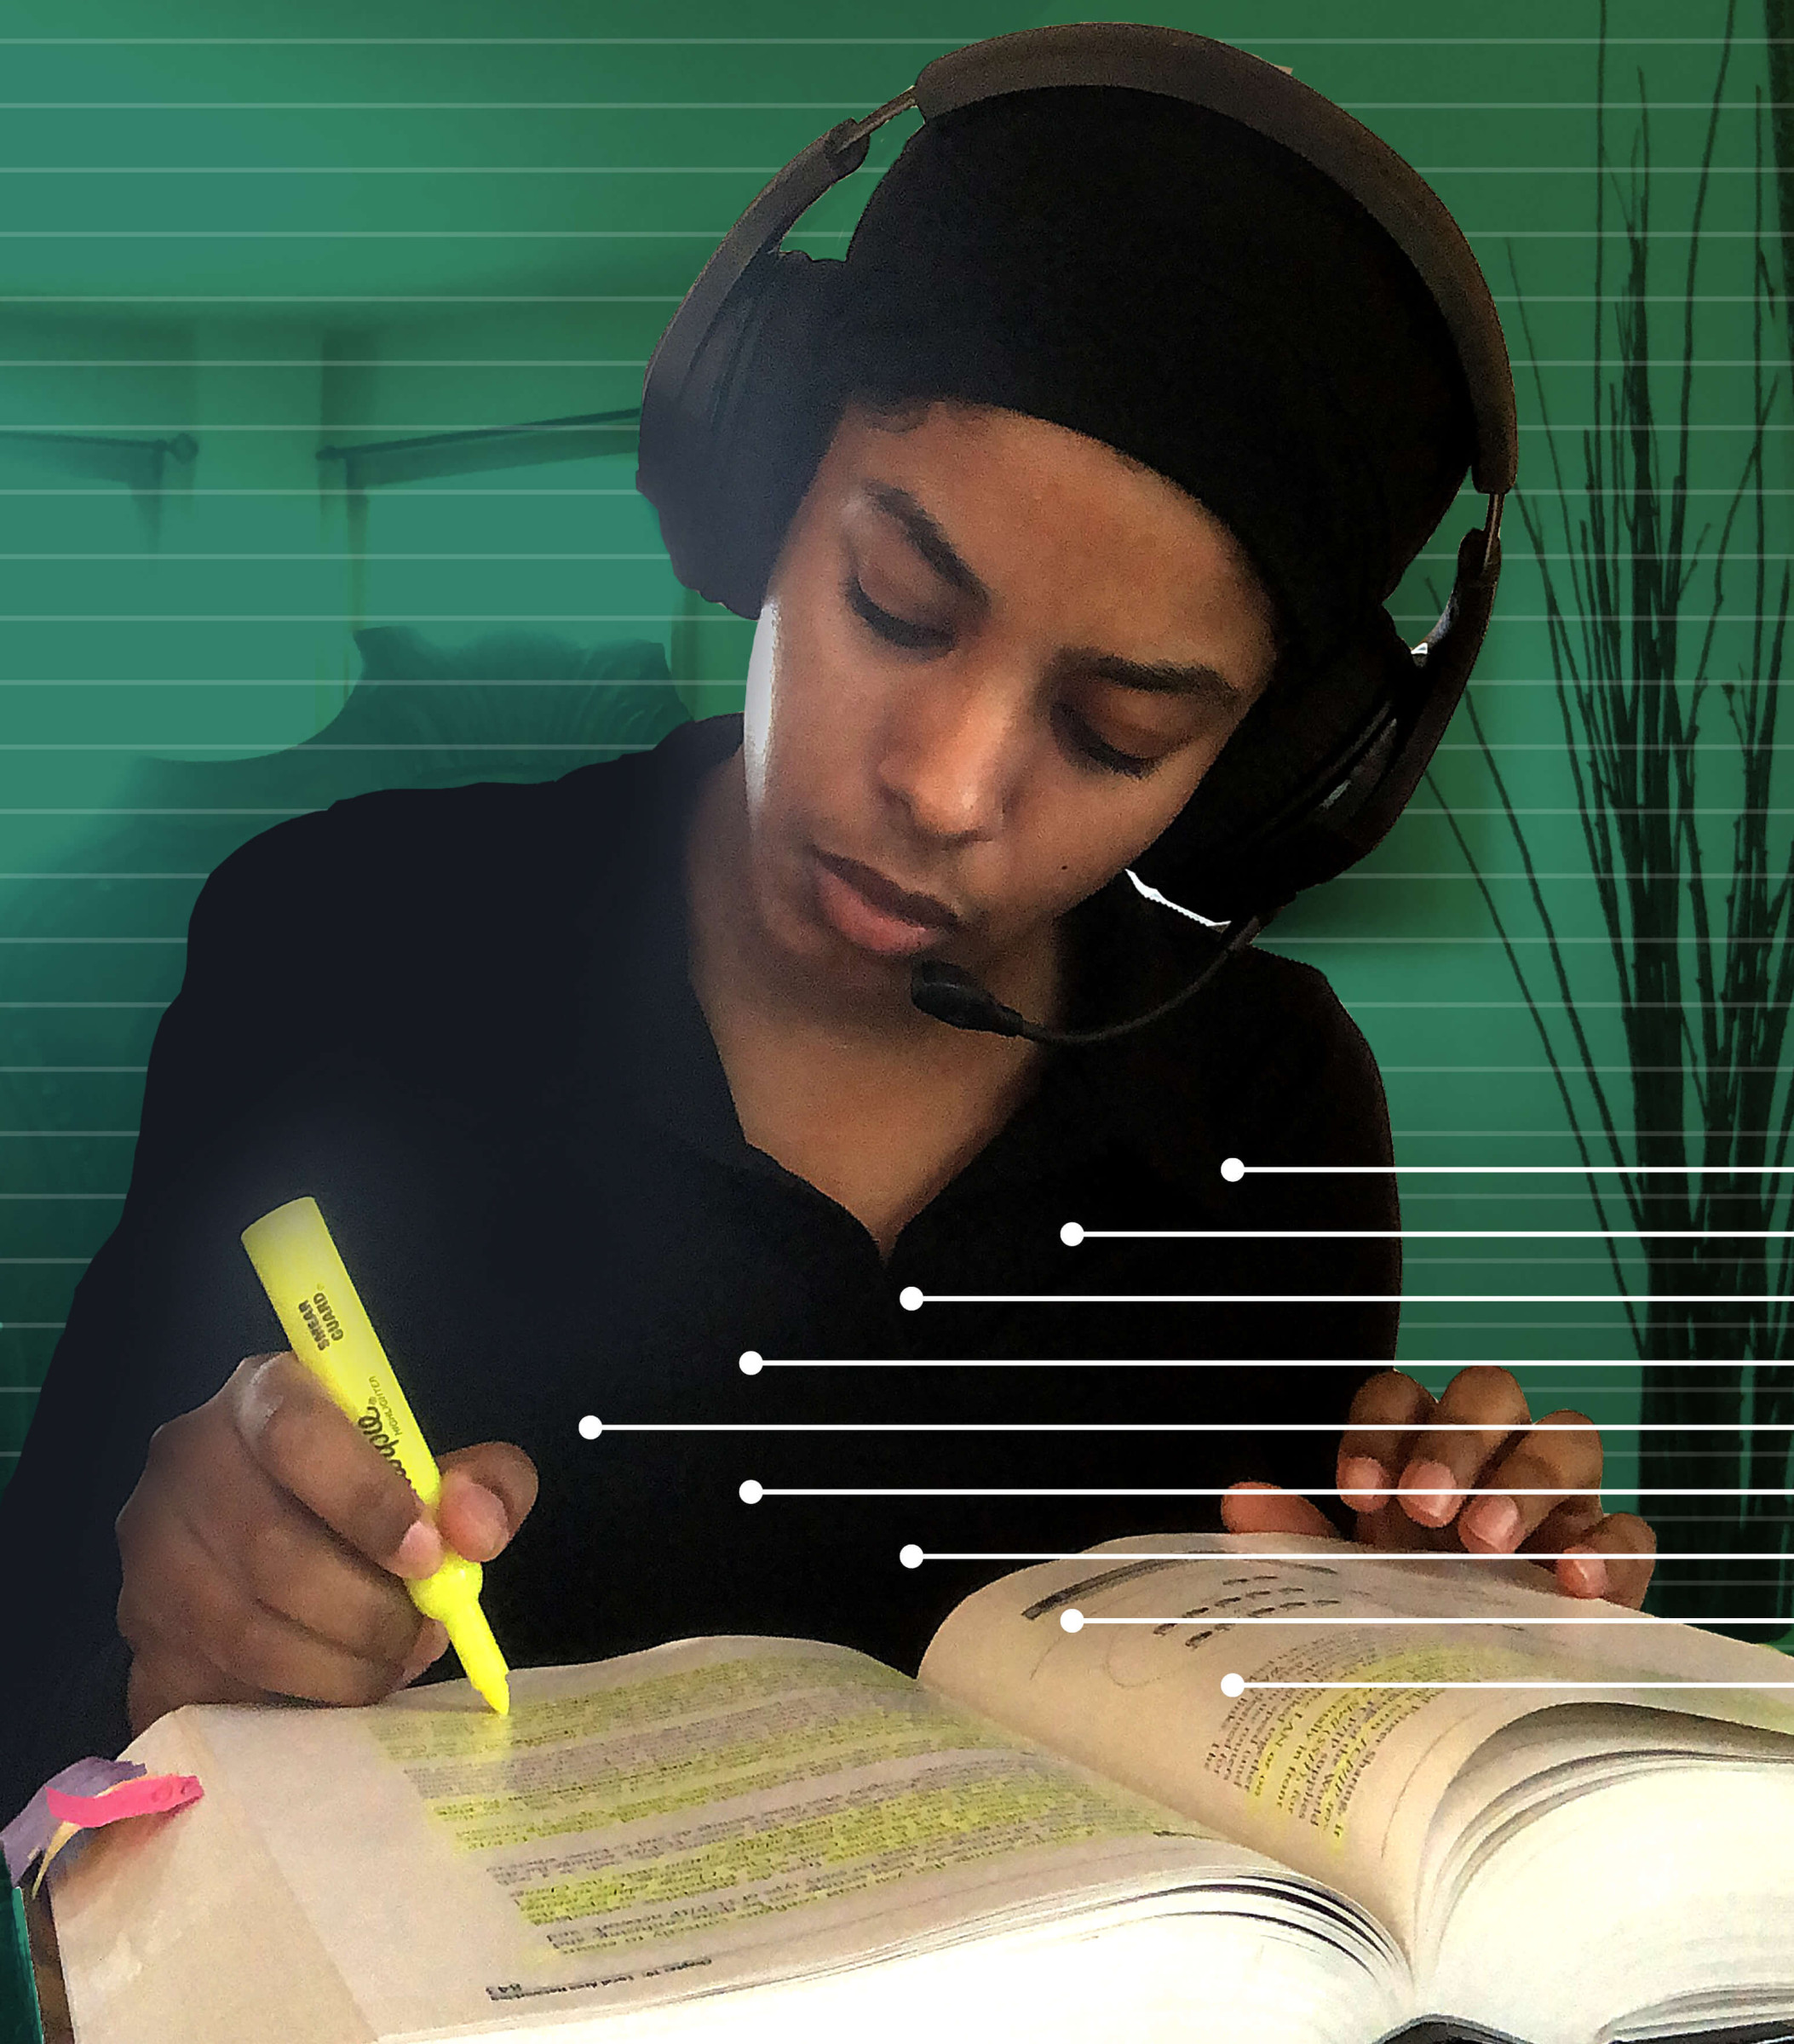 StraighterLine student Valerie V. studying and highlighting text in book